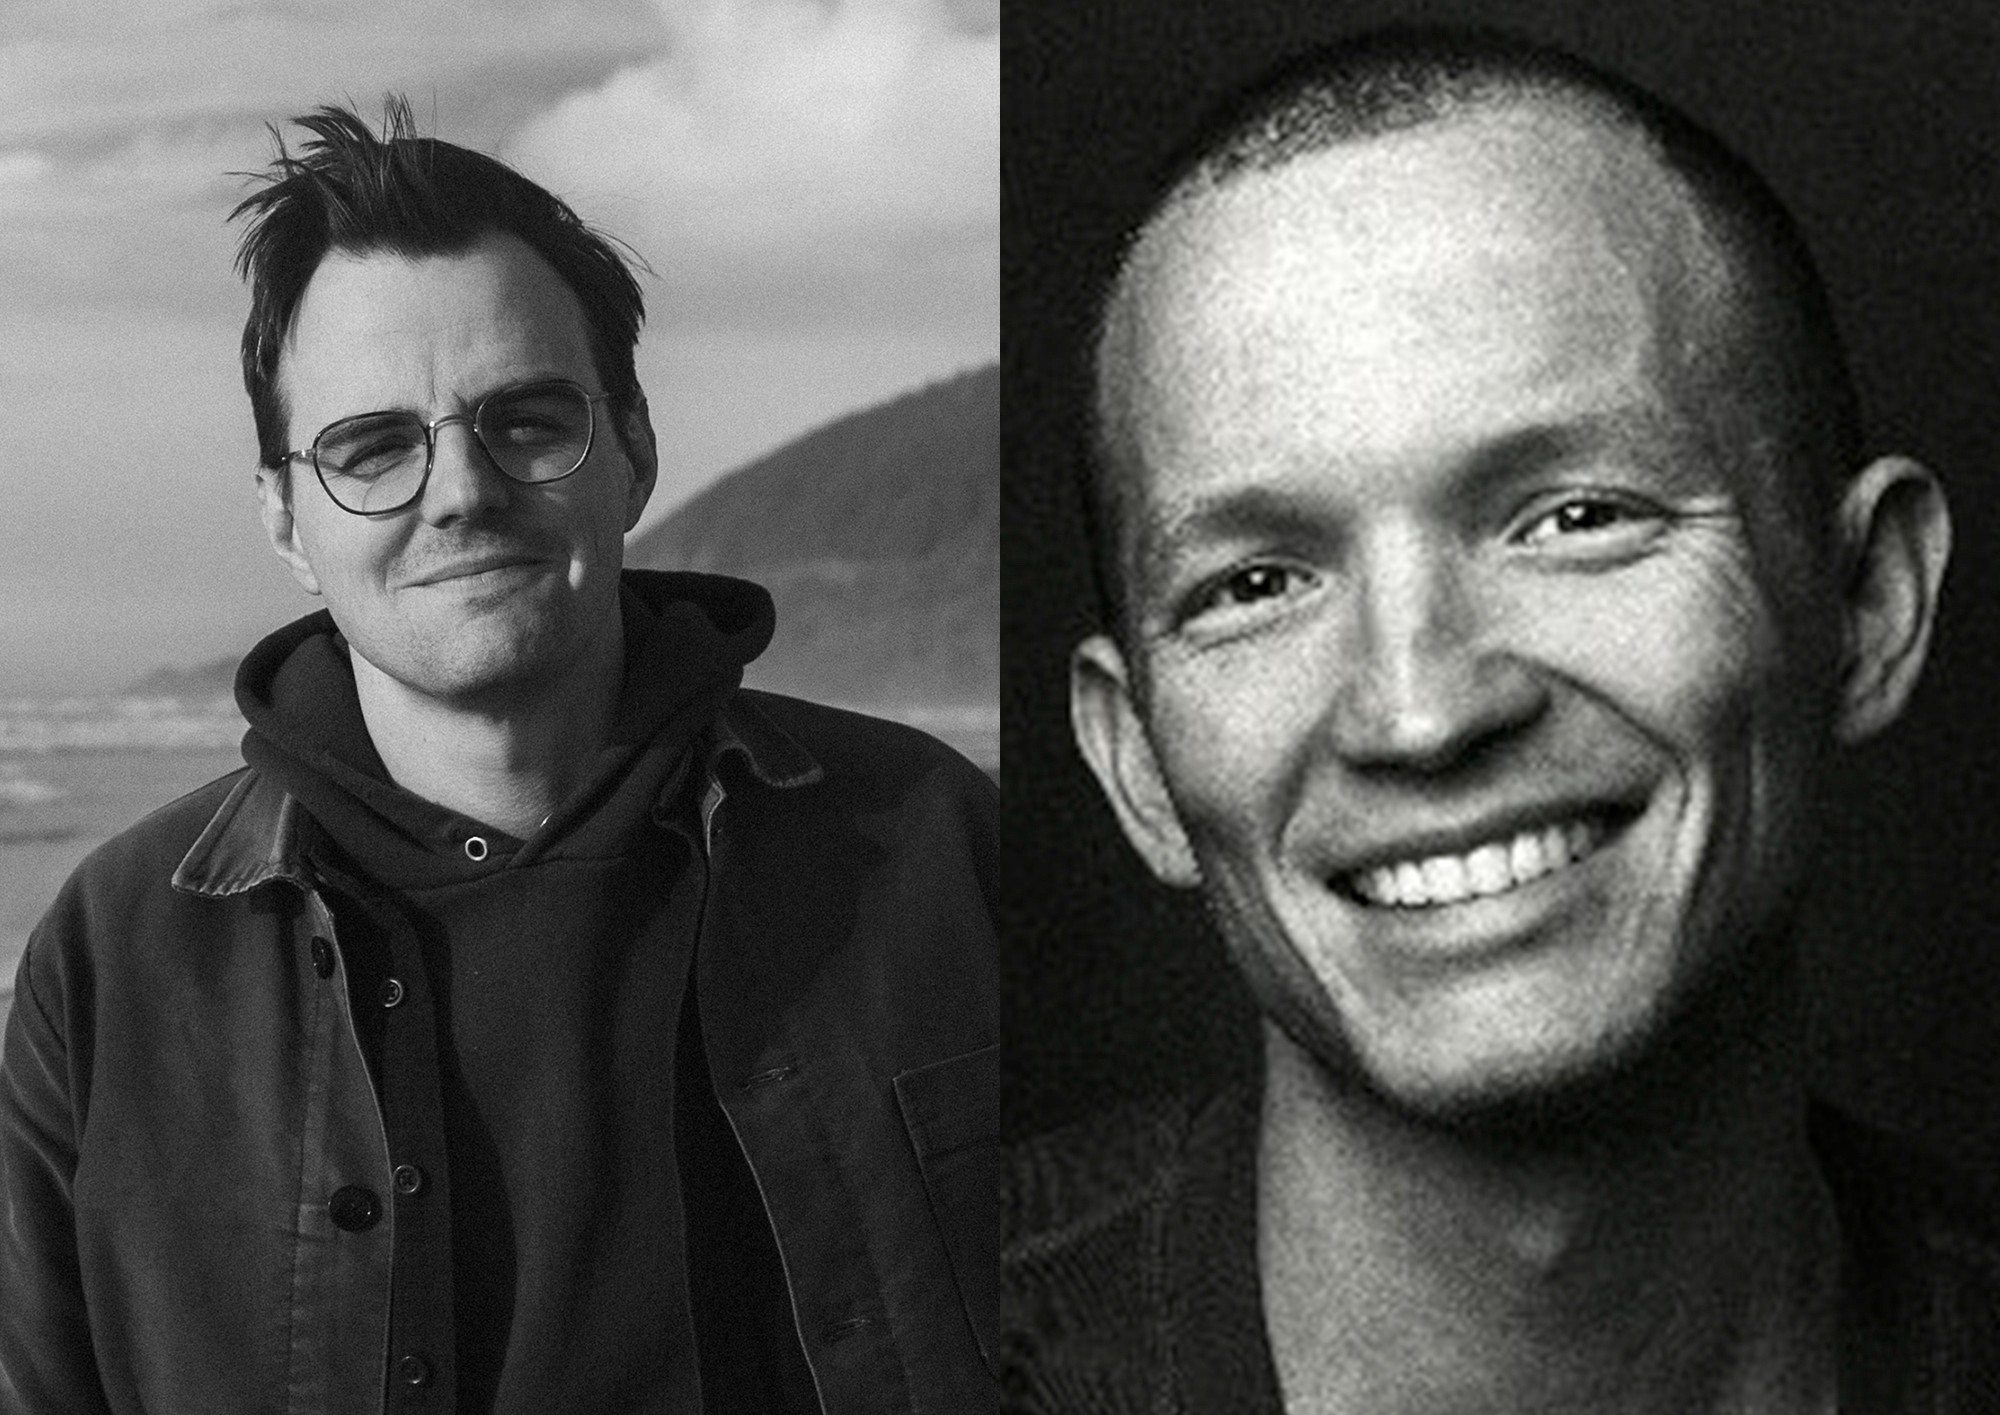 Portraits of filmmaker Jeff Rutherford and actor Jefferson White